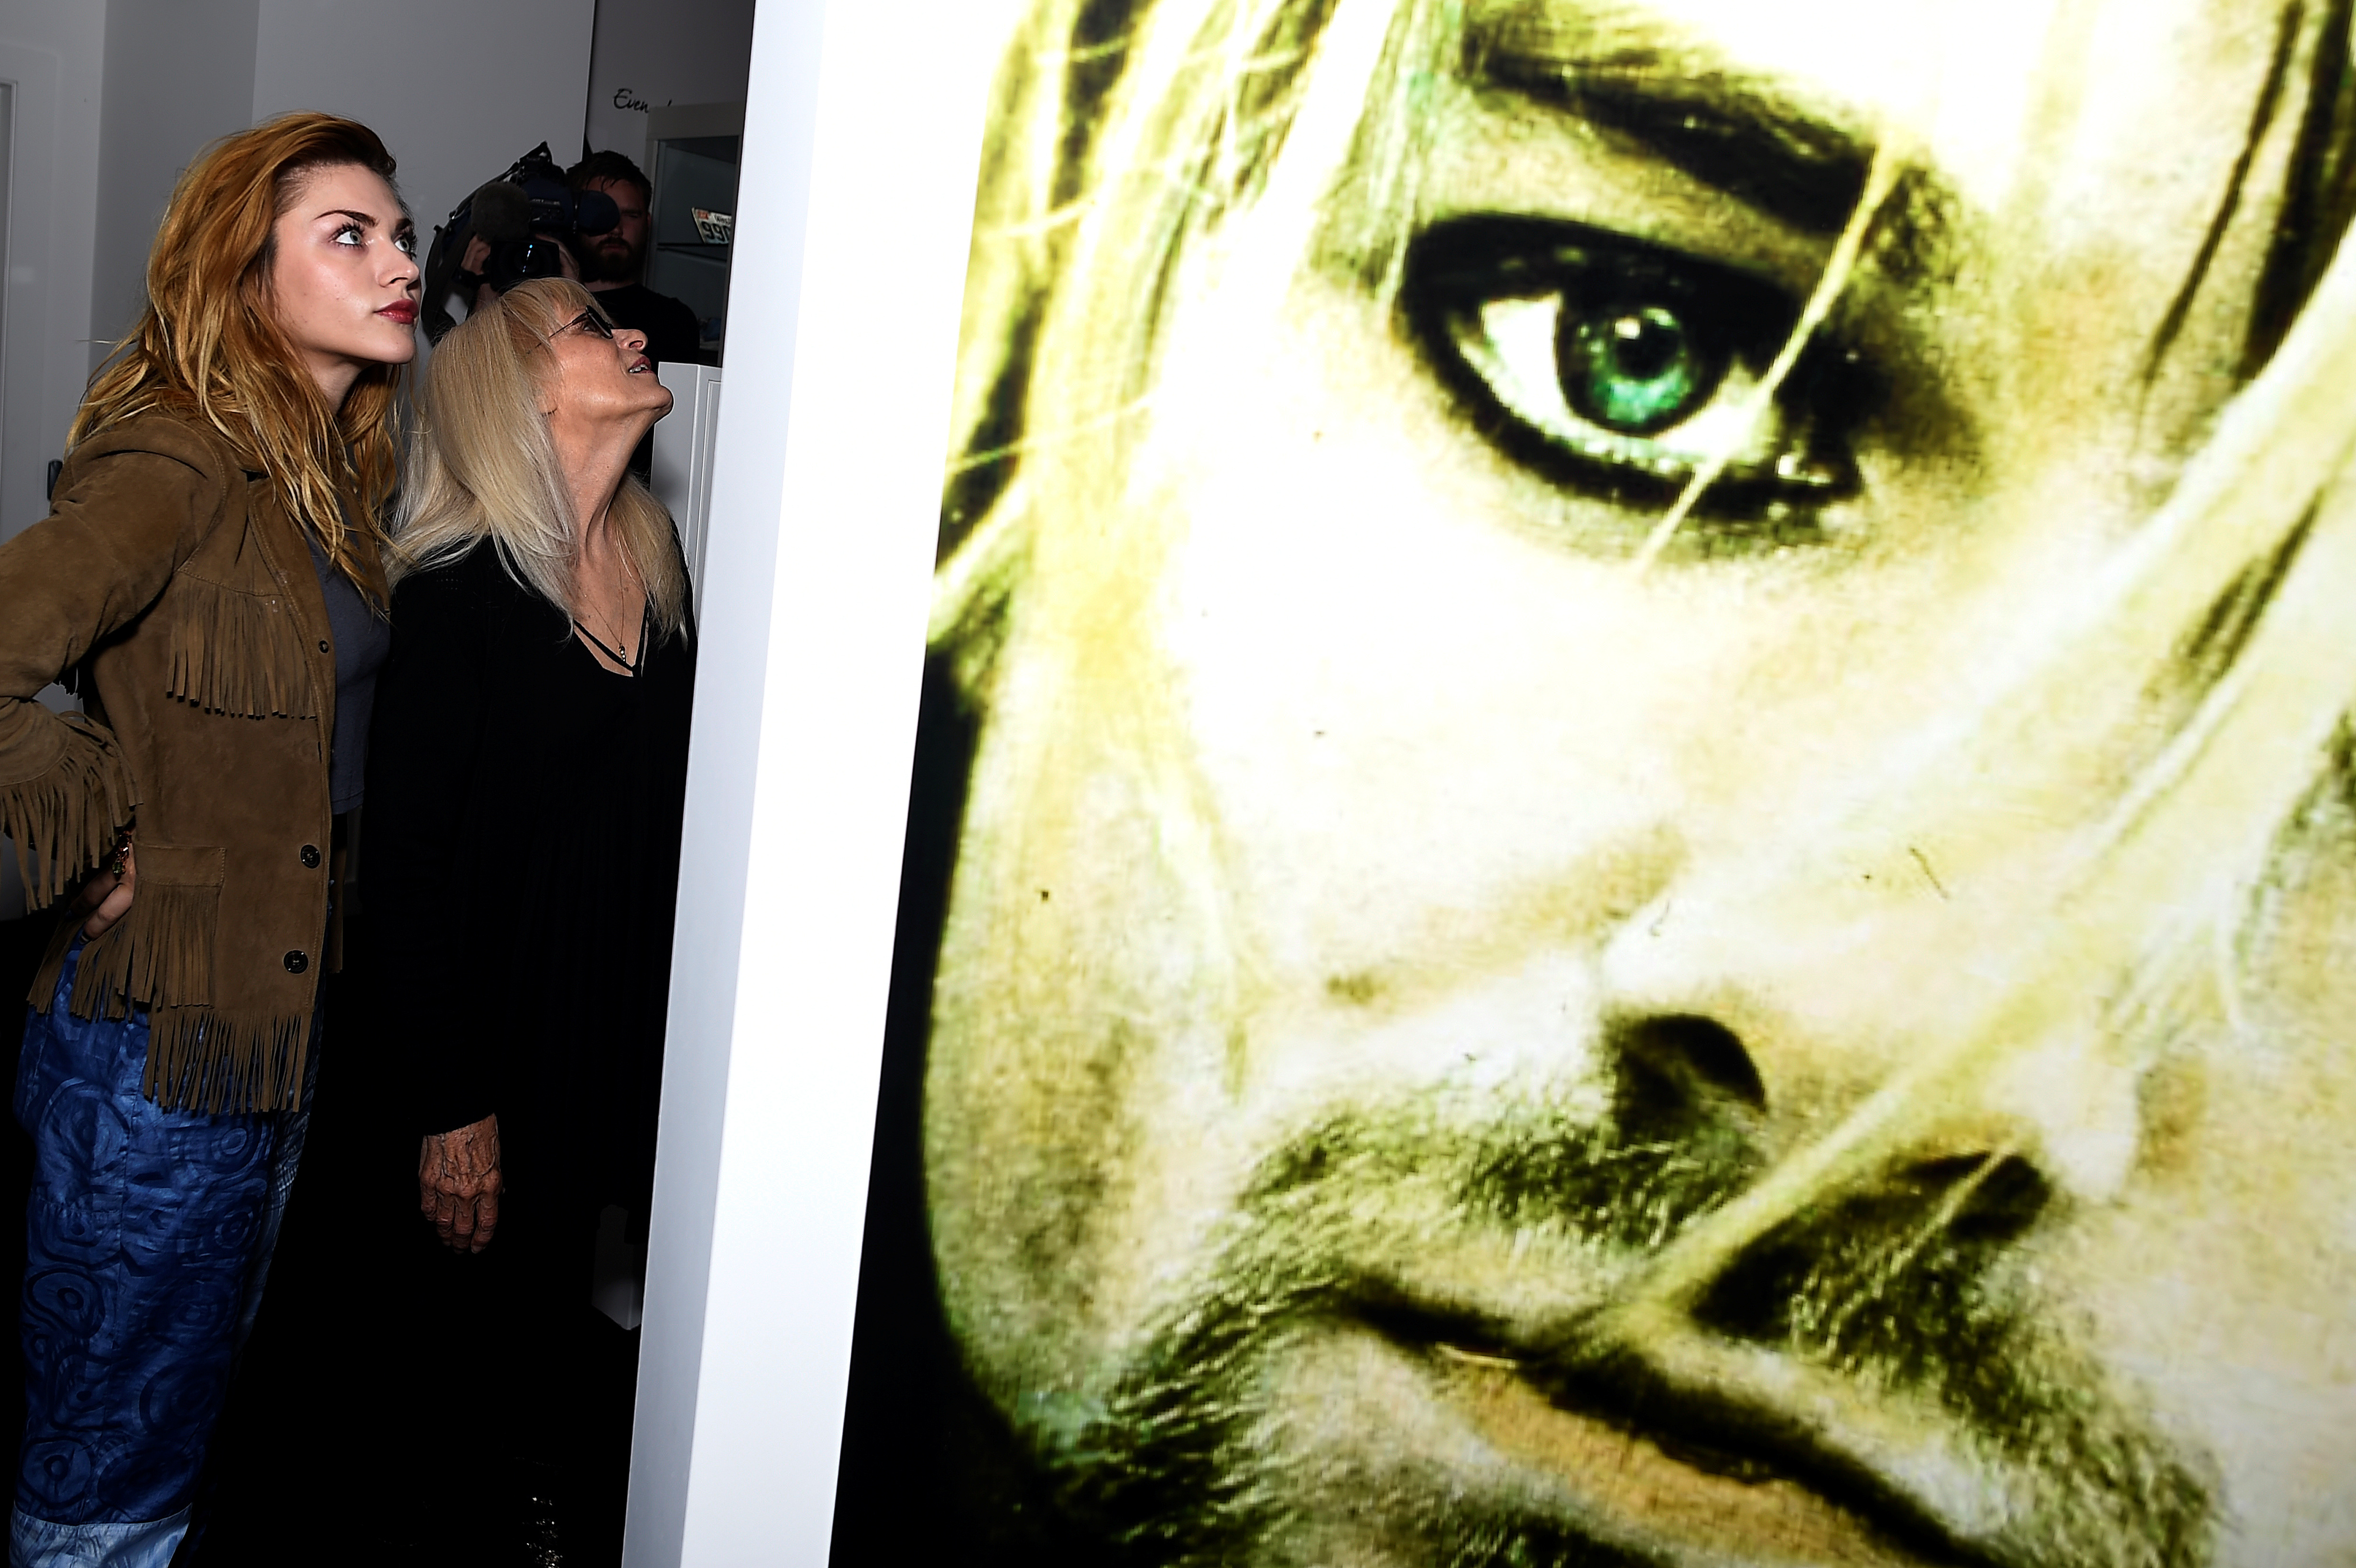 Kurt Cobain's daughter Frances Bean Cobain attends the opening of 'Growing Up Kurt' exhibition featuring personal items of Nirvana frontman Kurt Cobain at the museum of Style Icons in Newbridge